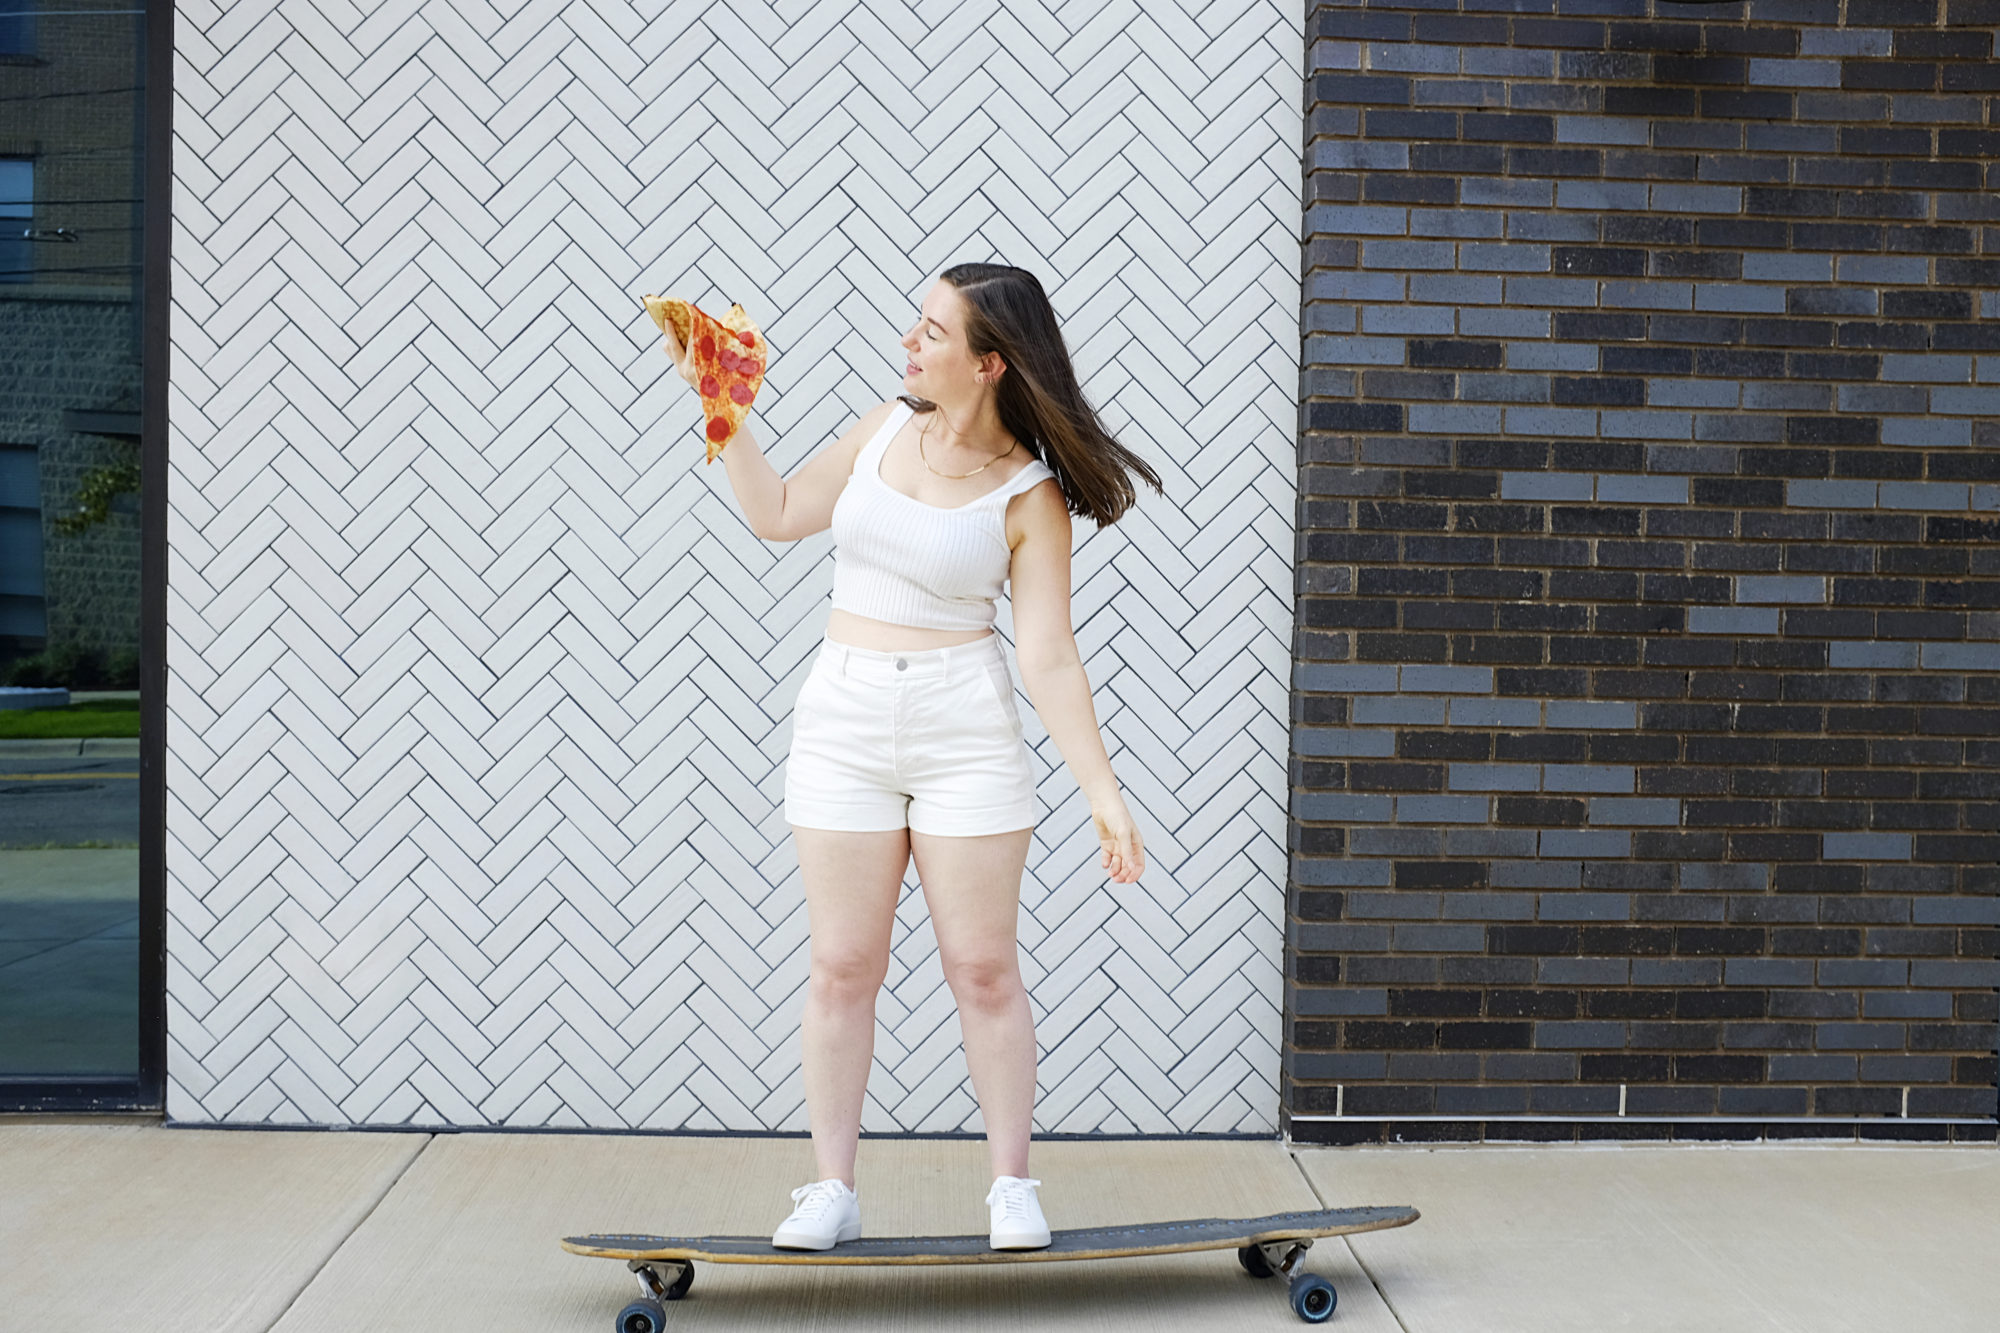 Alyssa wears The Cotton Merino Cami on a skateboard with a piece of pizza